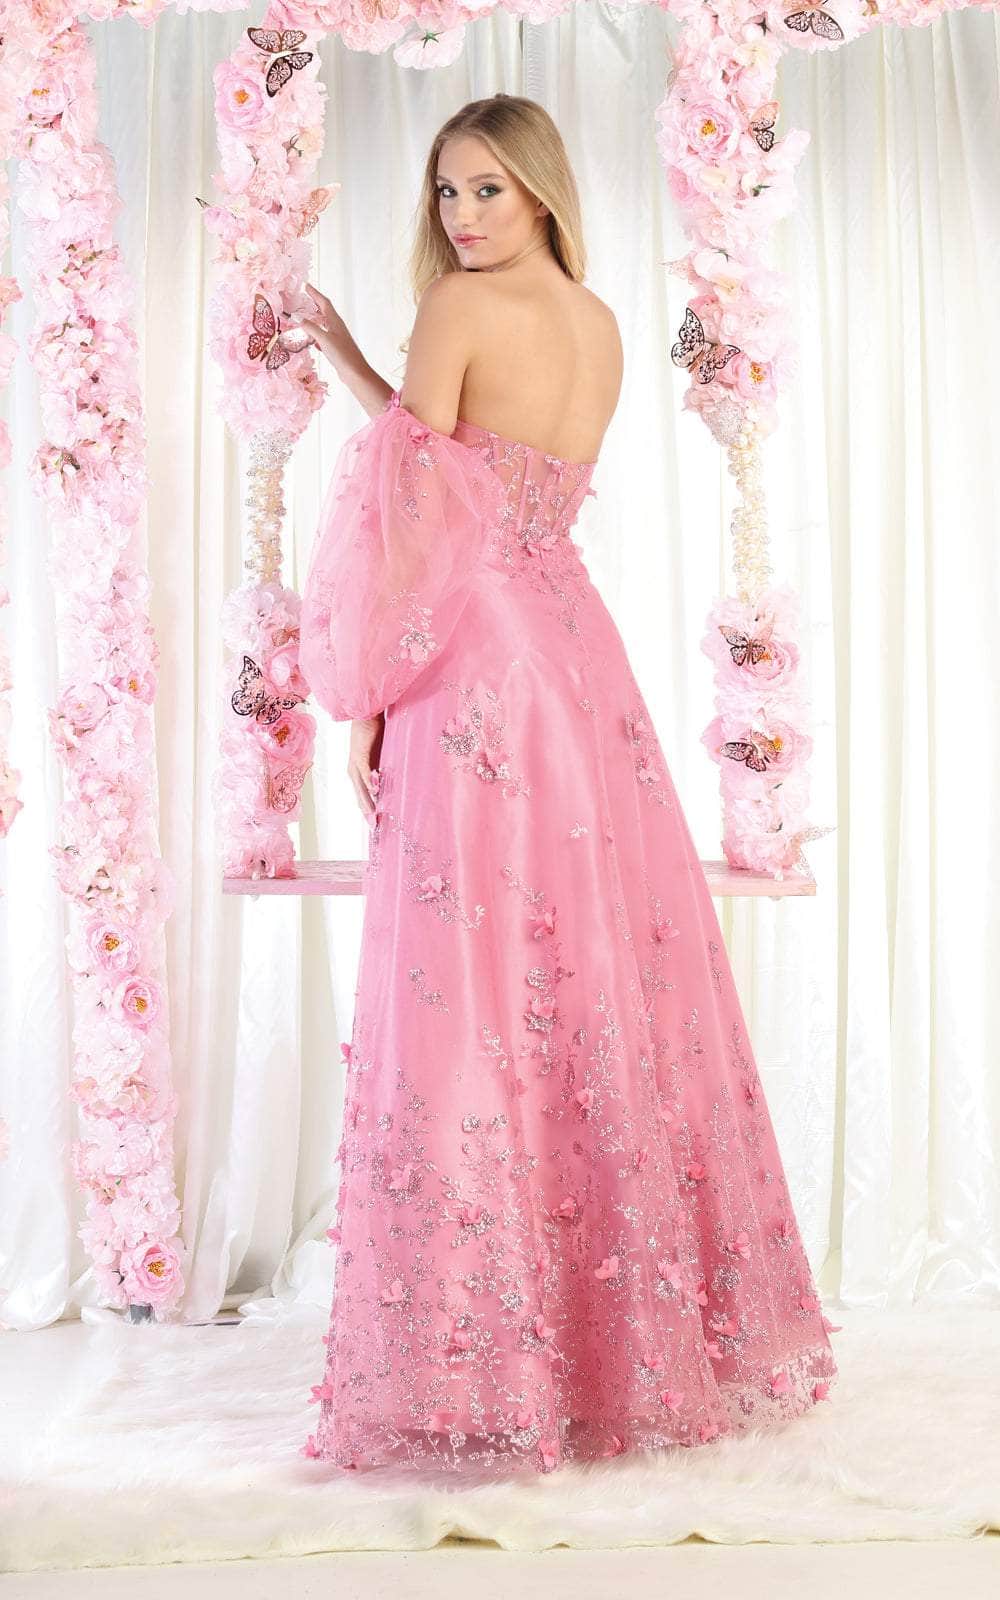 May Queen RQ8015 - Strapless Corseted Floral Gown Special Occasion Dress